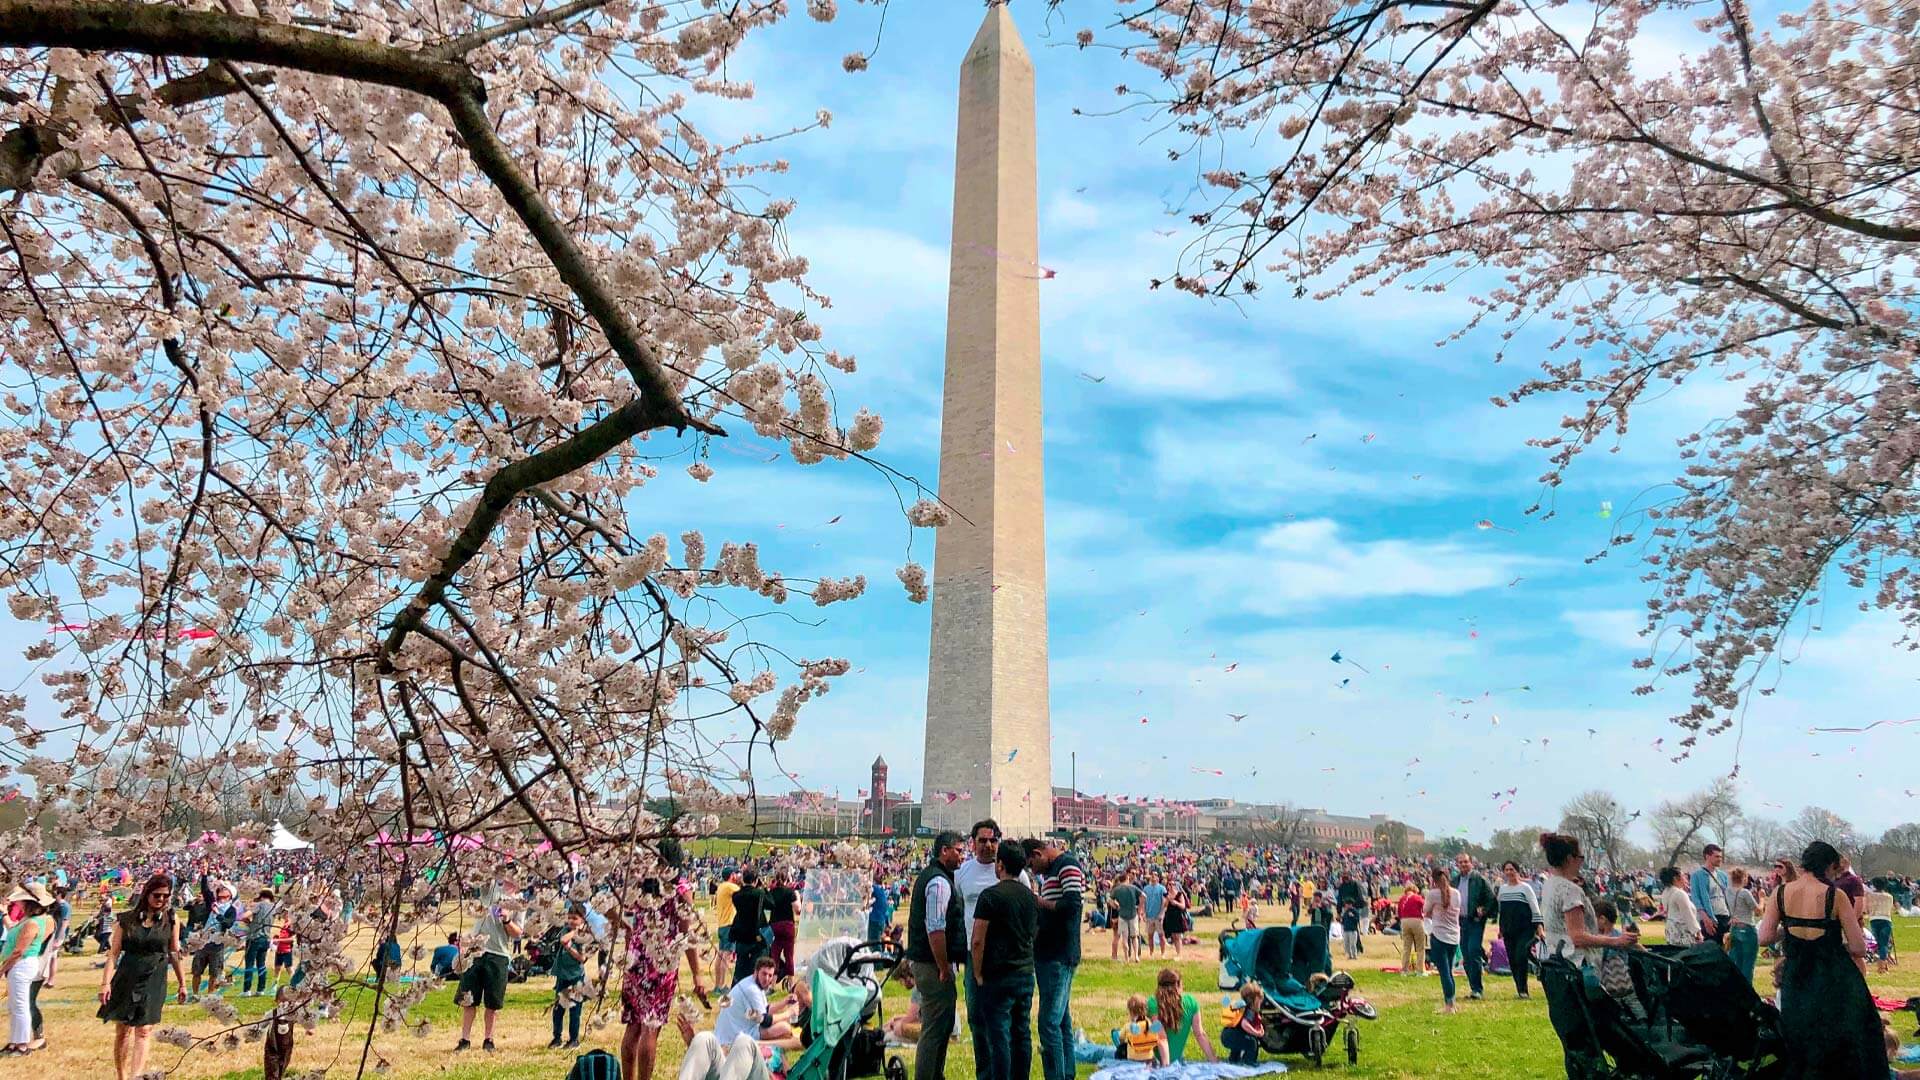 national mall crowded with tourists during dc cherry blossom festival